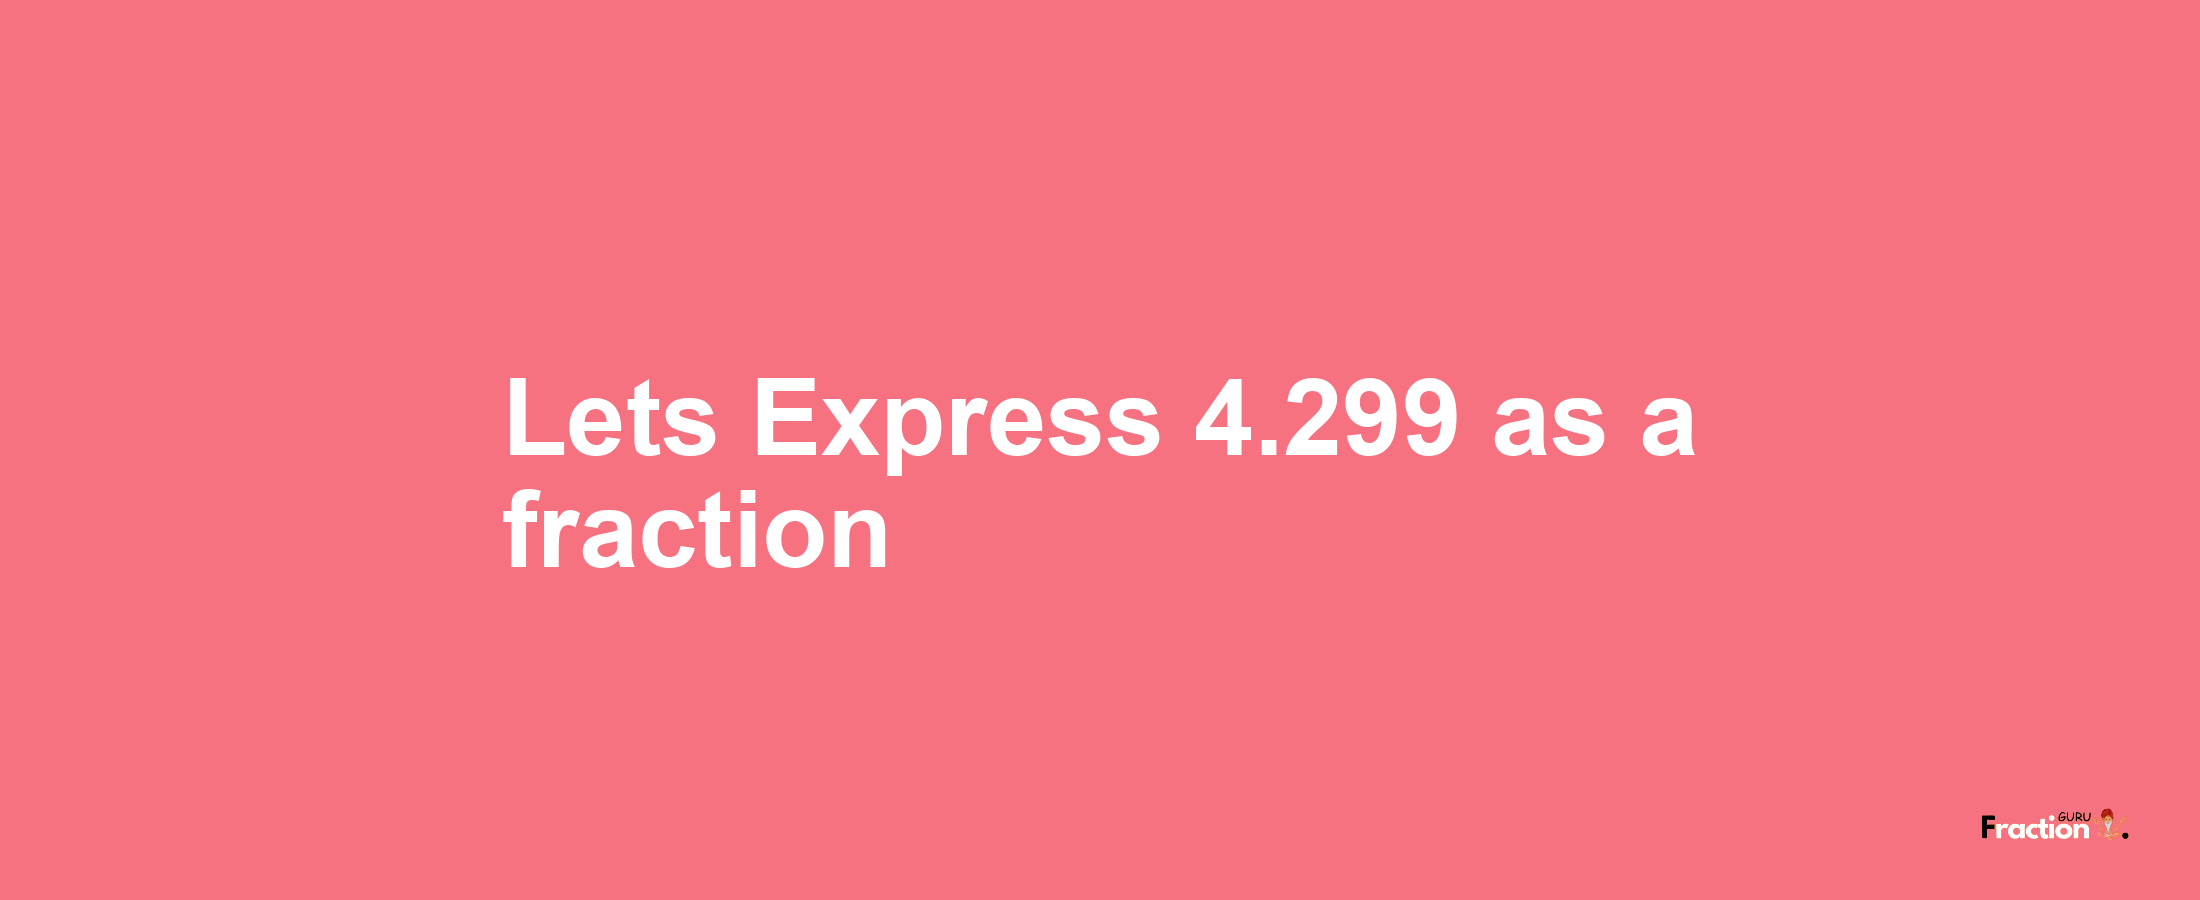 Lets Express 4.299 as afraction